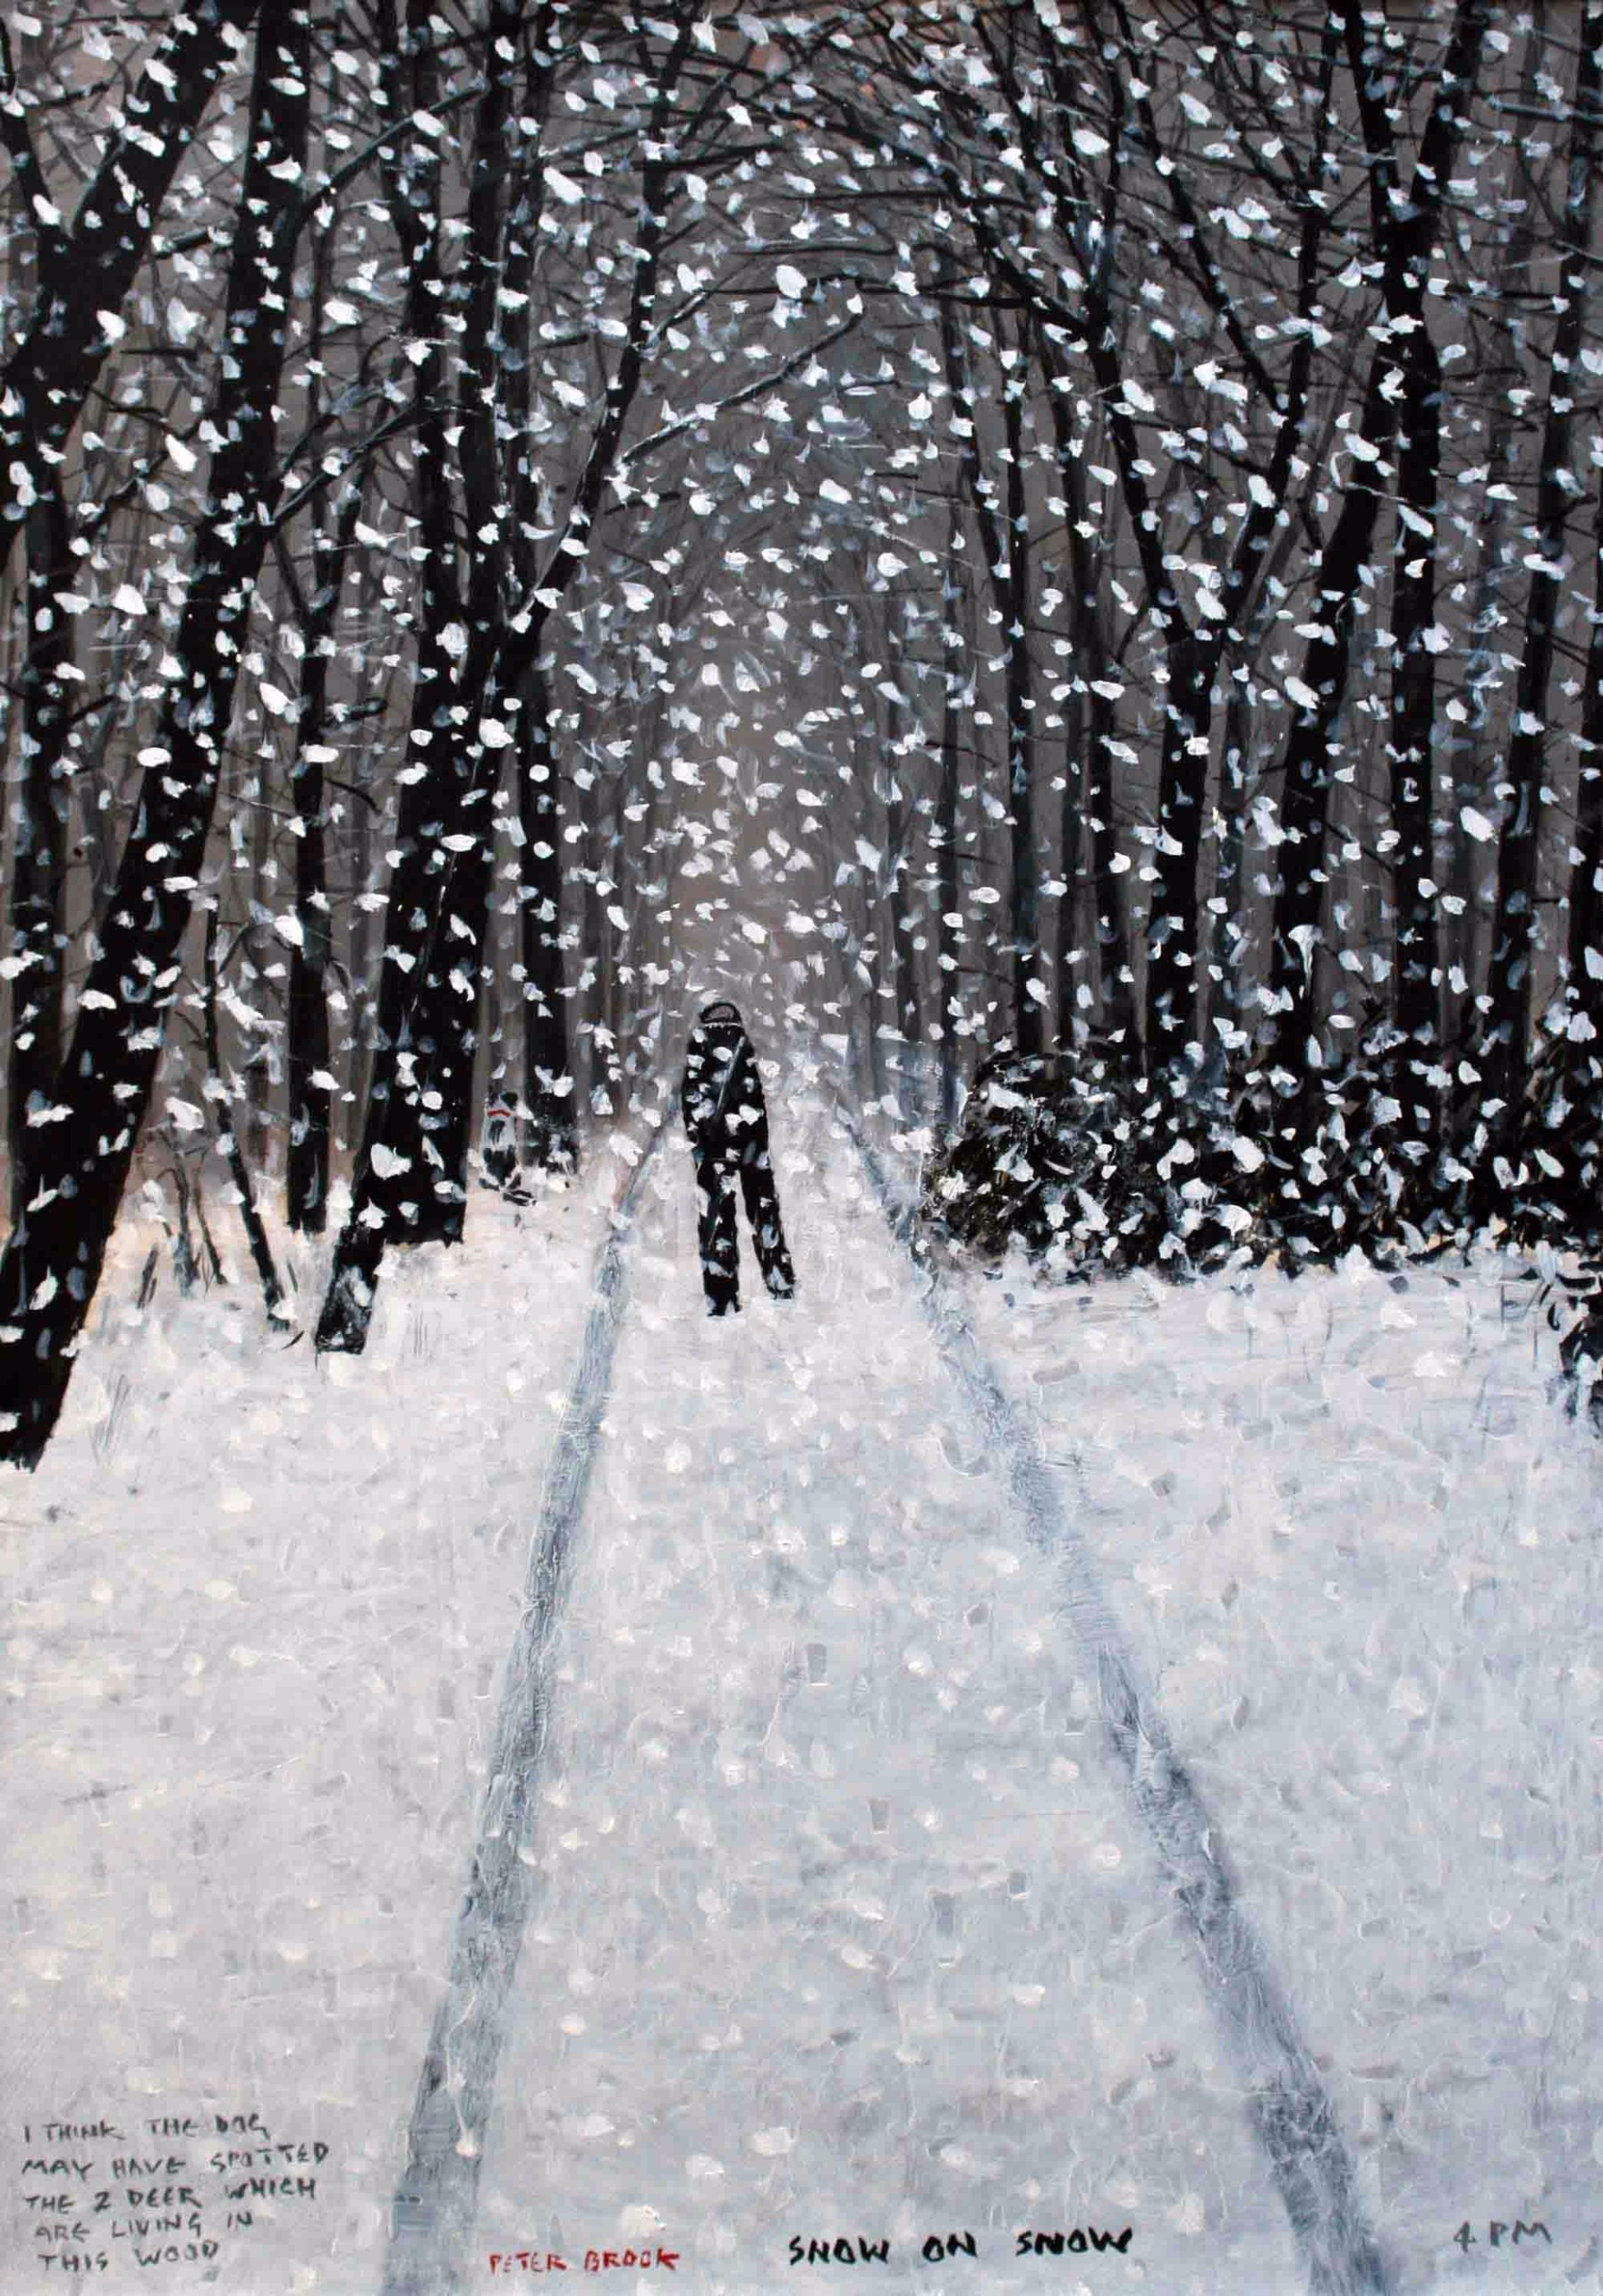 Snow On Snow by Peter Brook, Figurative | Snow | Naive | Northern | Nostalgic